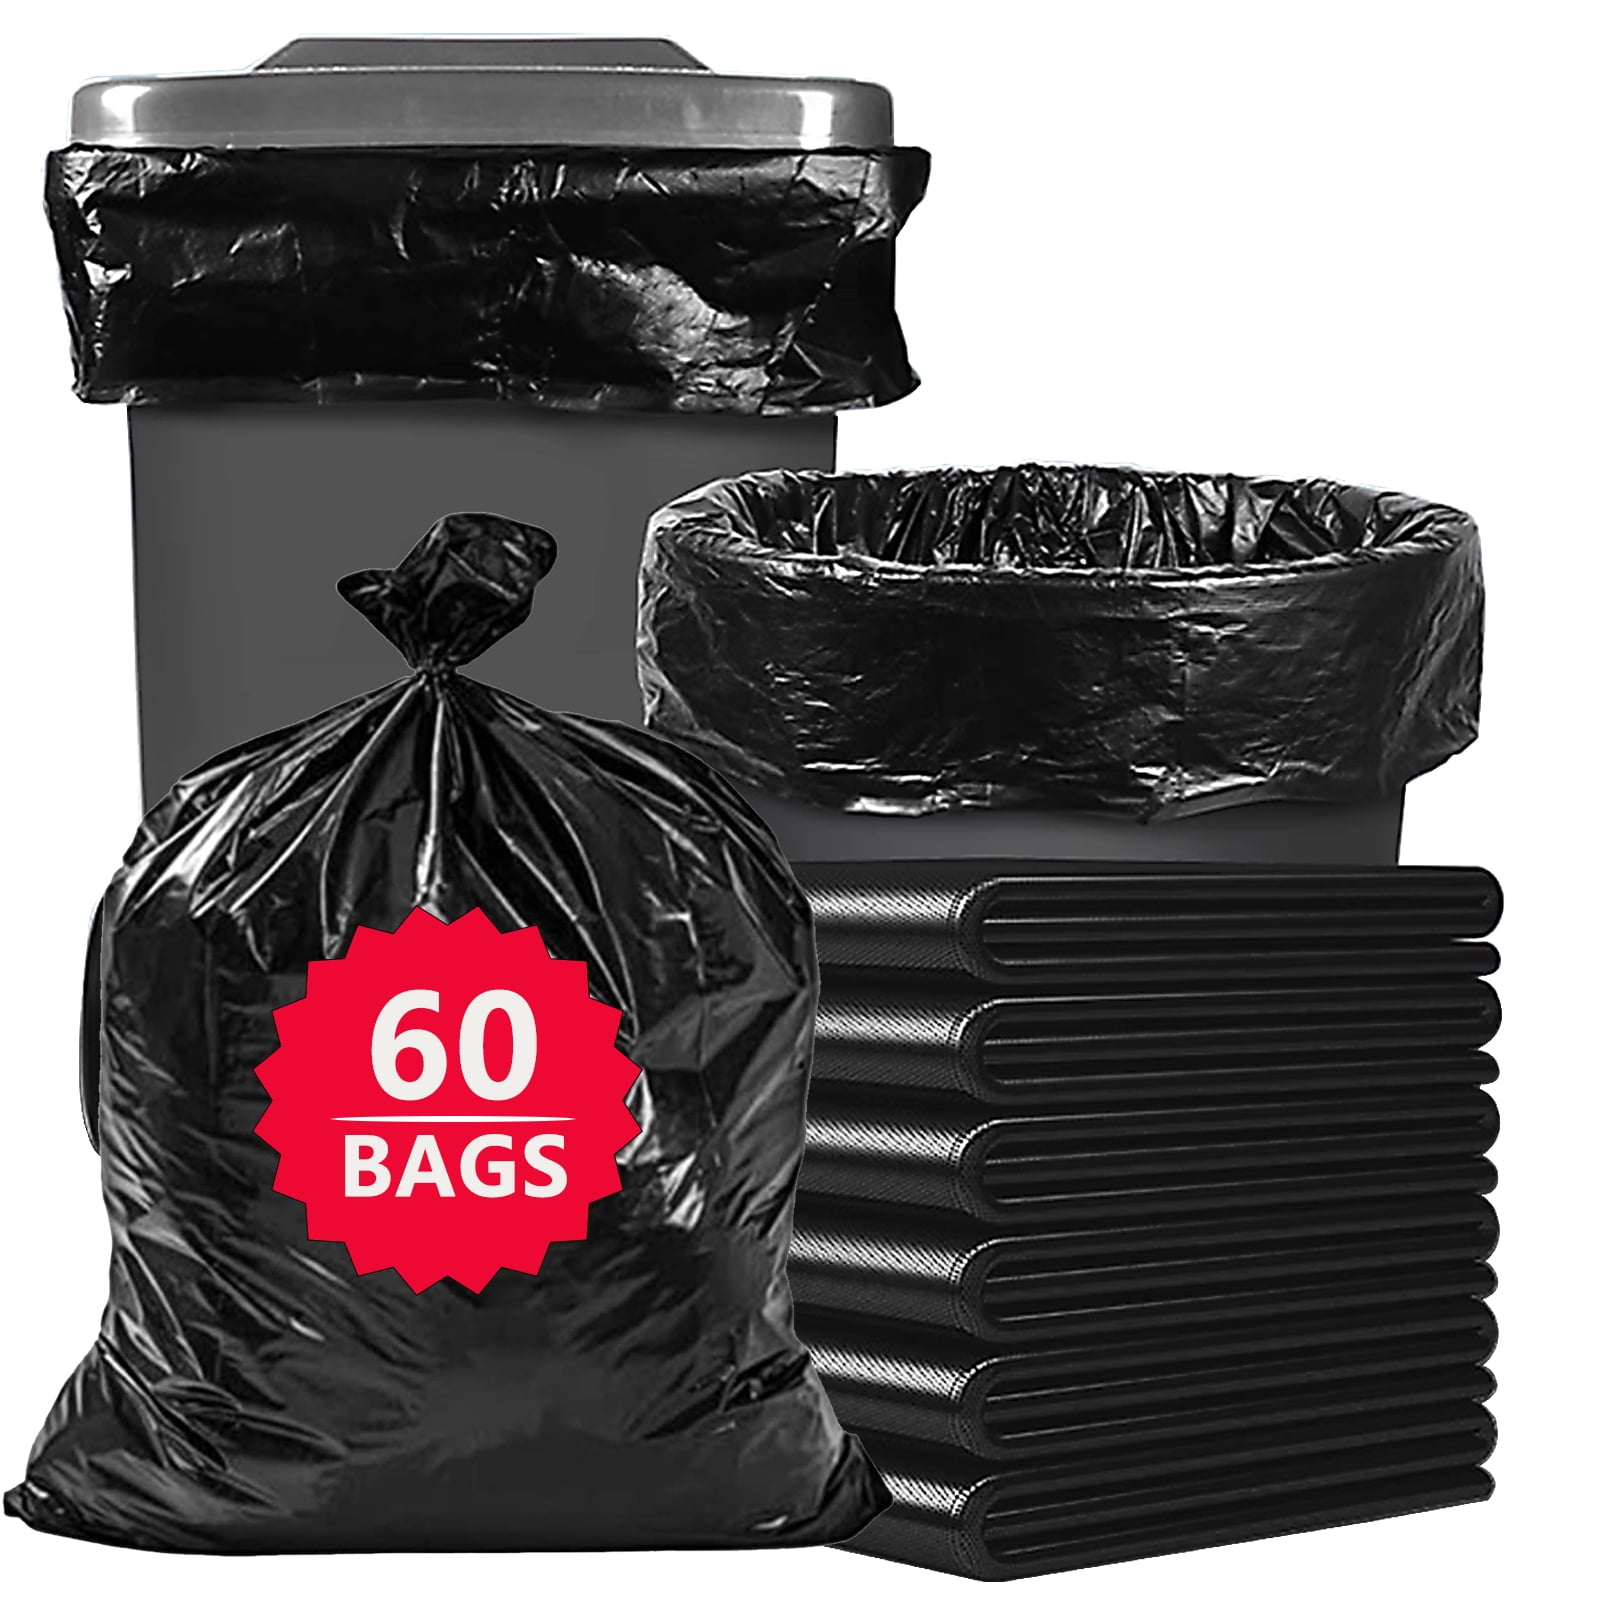 42 Gal Heavy-Duty Contractor Bags 3 MIL (32 Ct) – Payless Janitorial